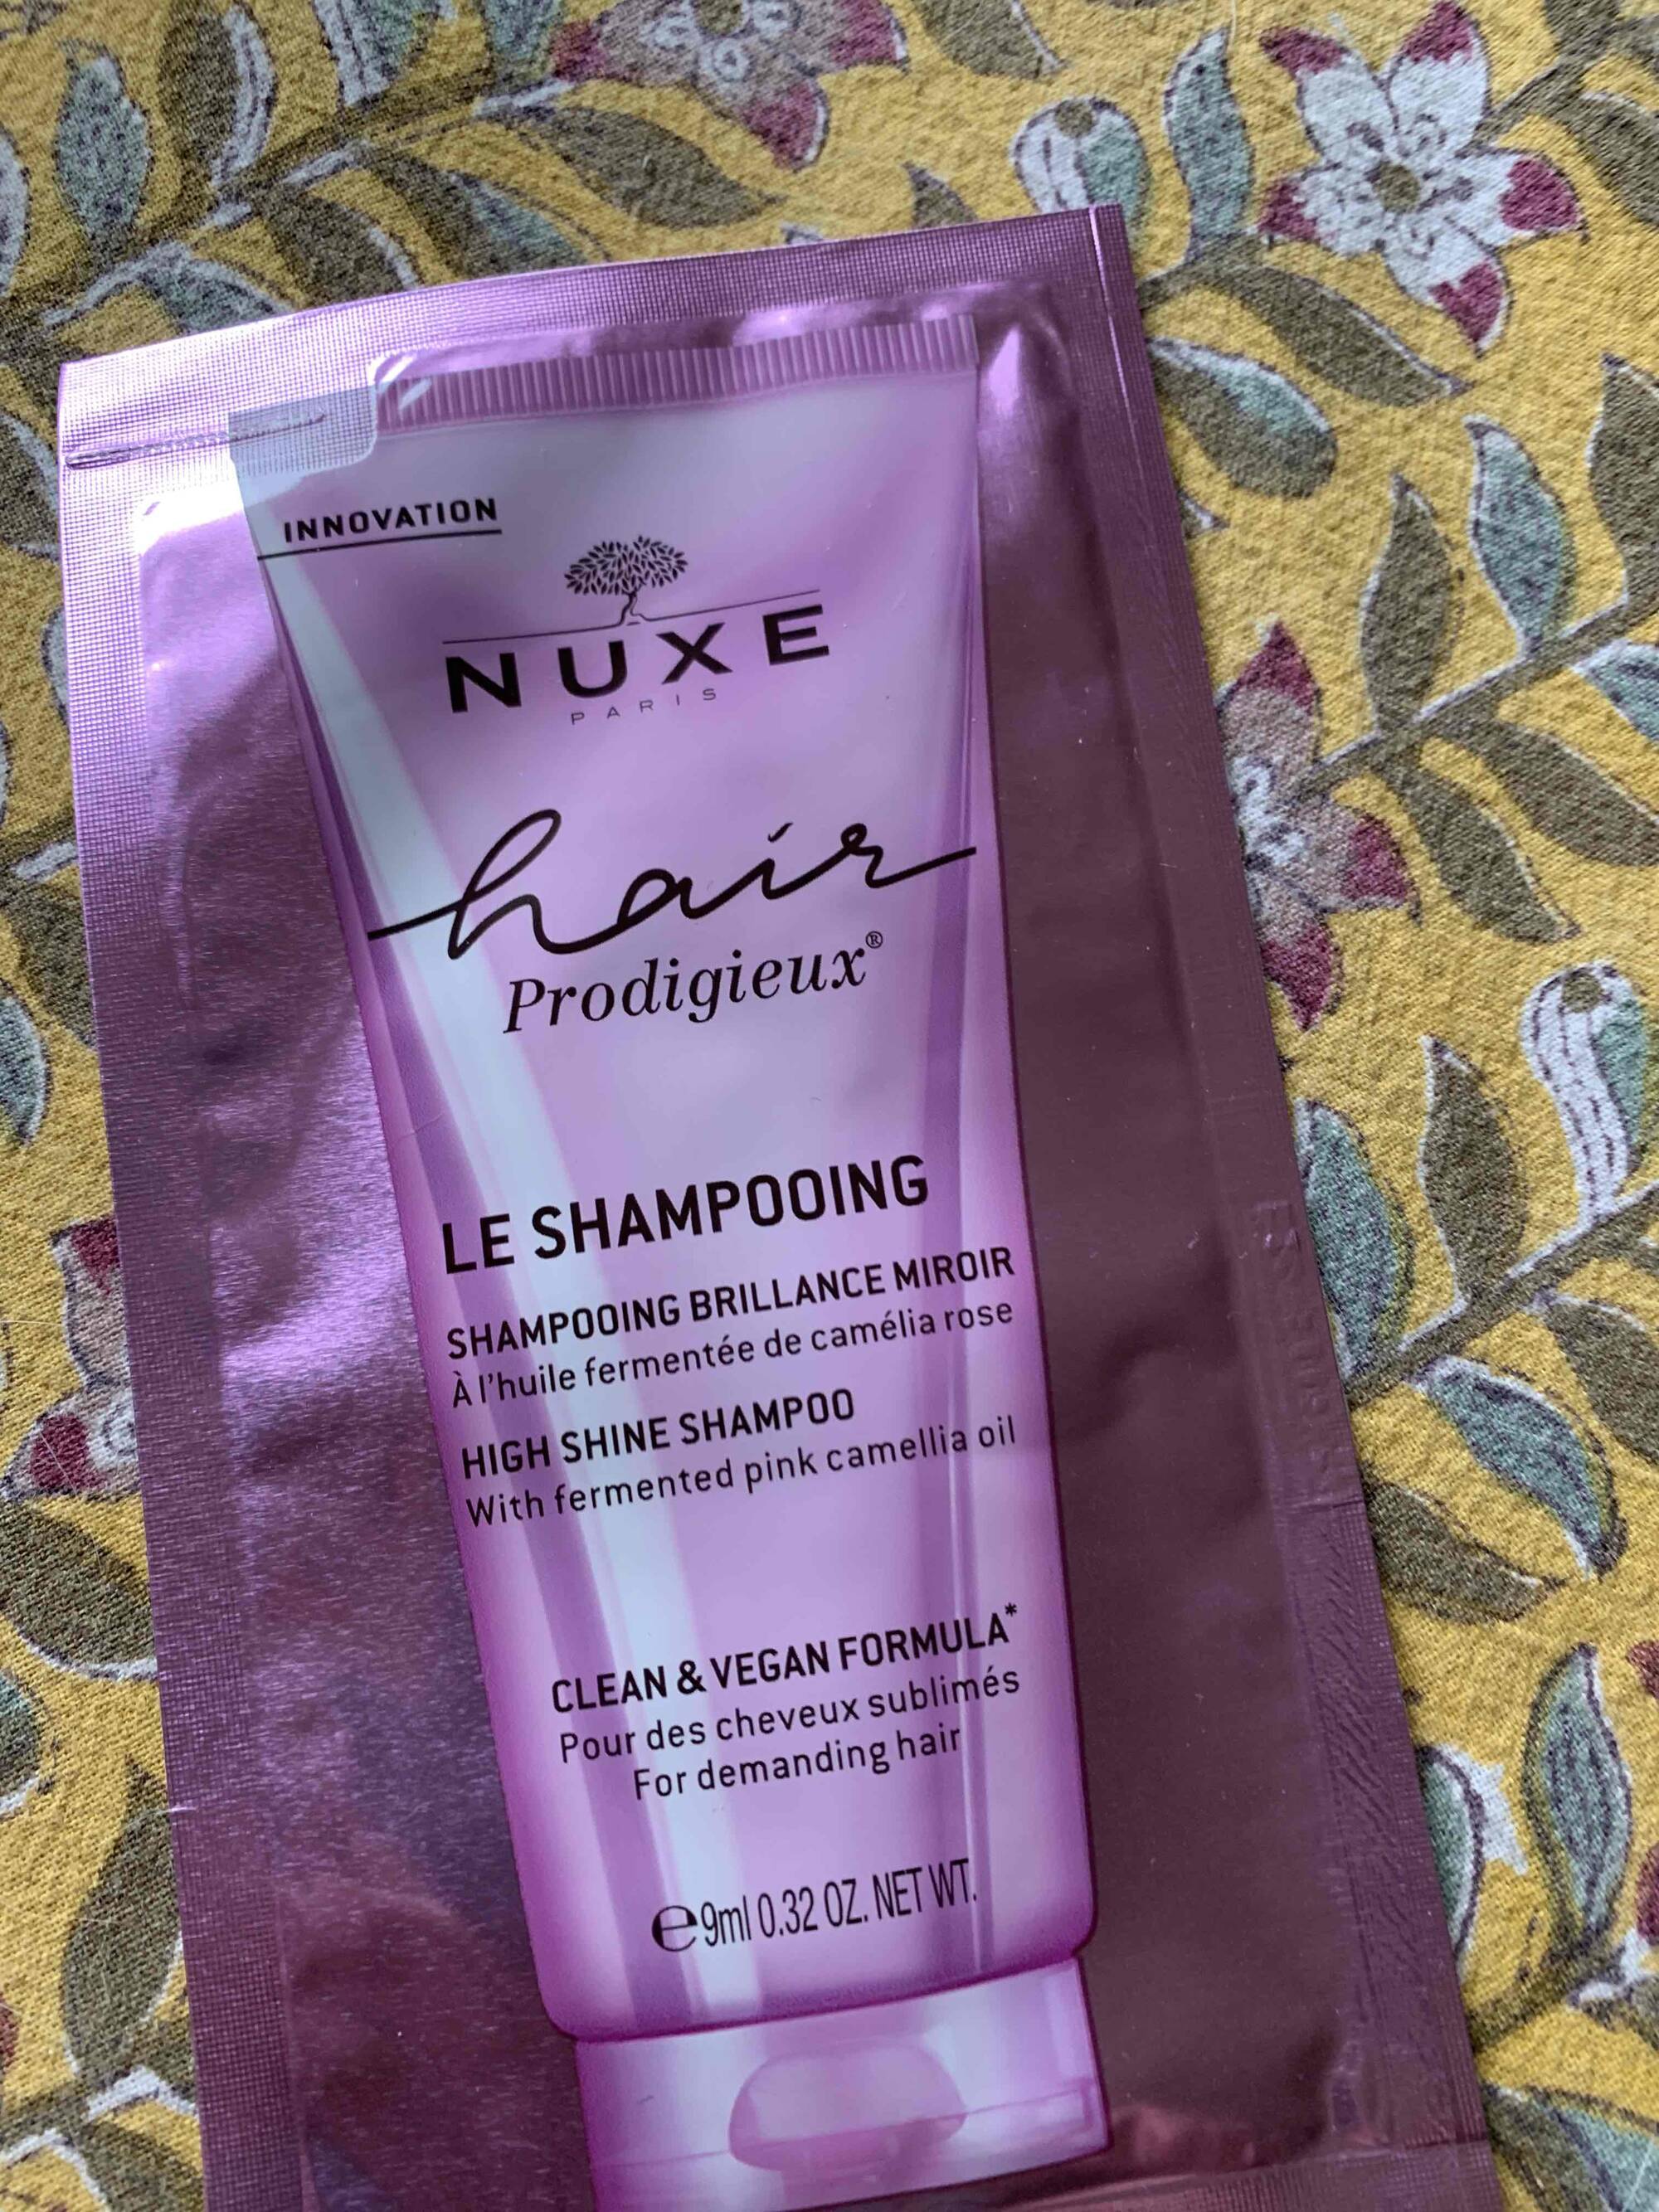 NUXE - Hair prodigieux - Le Shampooing 